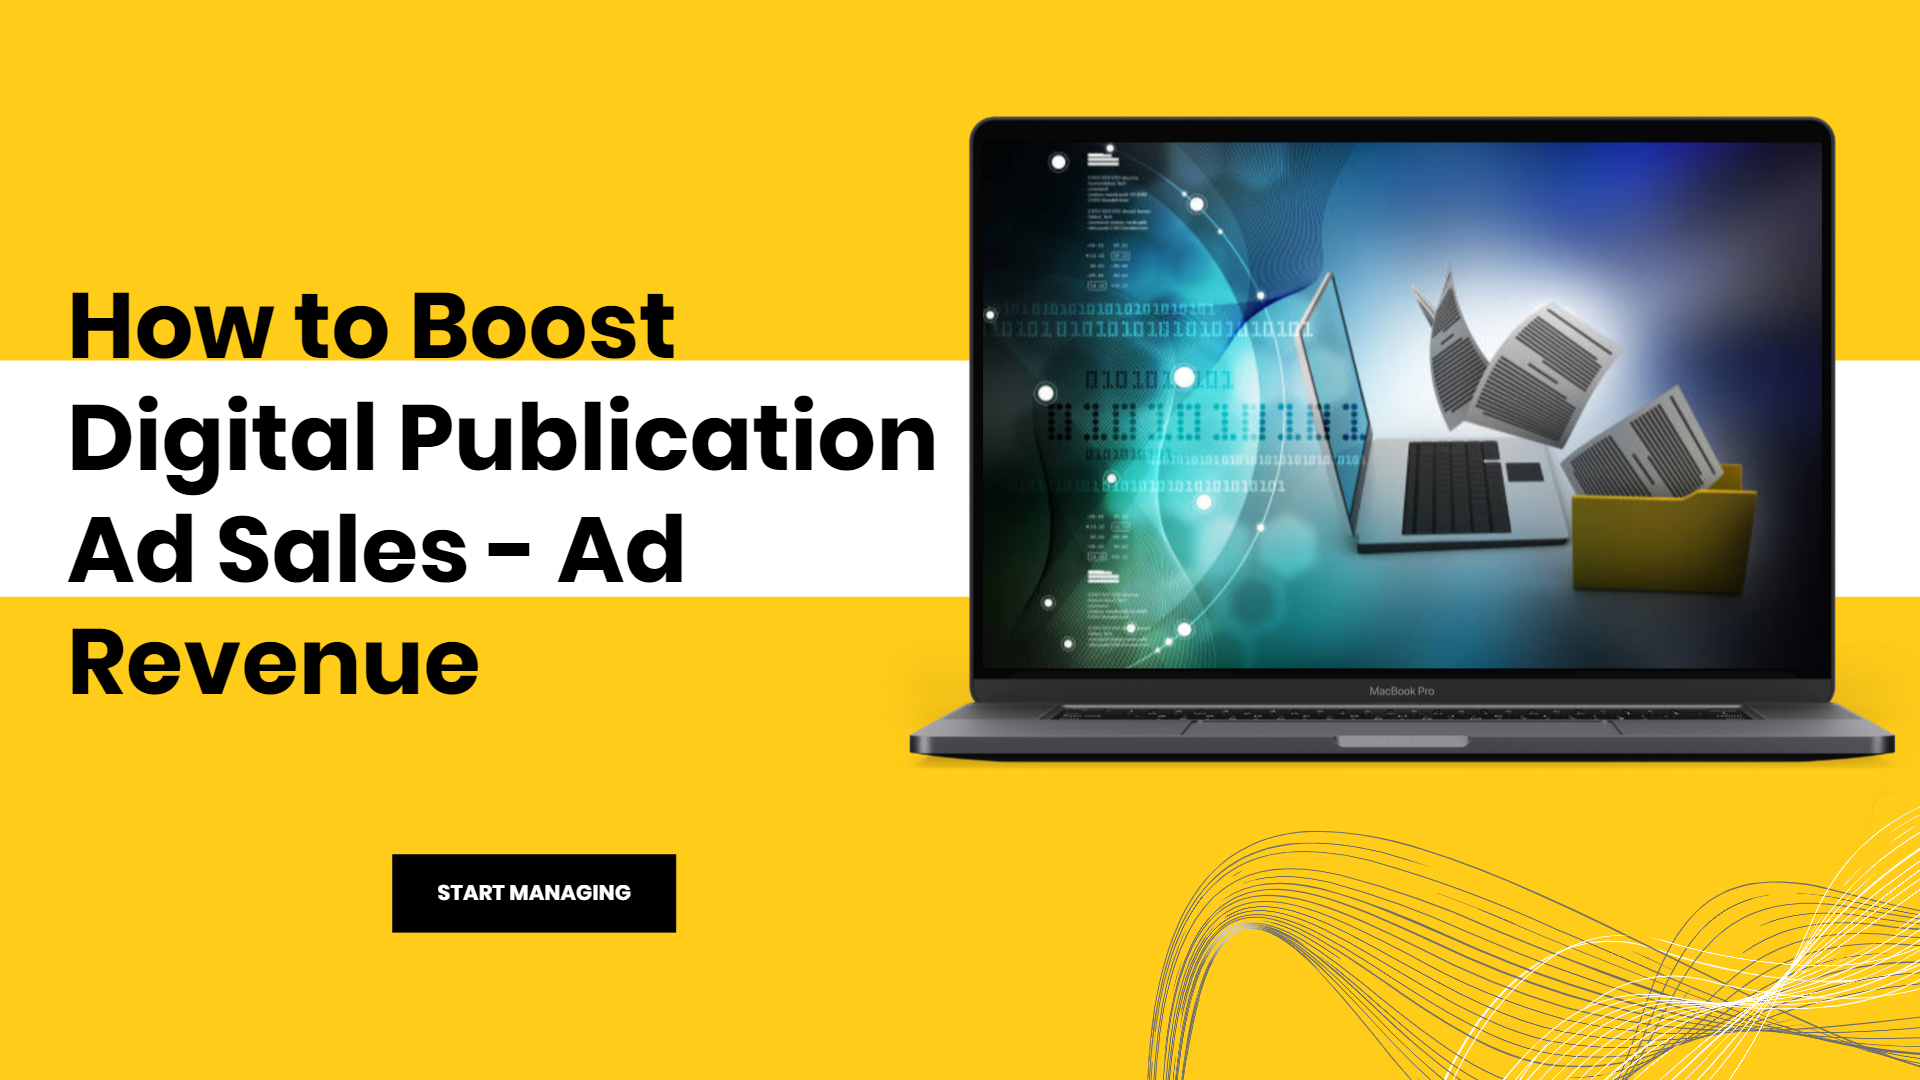 How to Boost Digital Publication Ad Sales